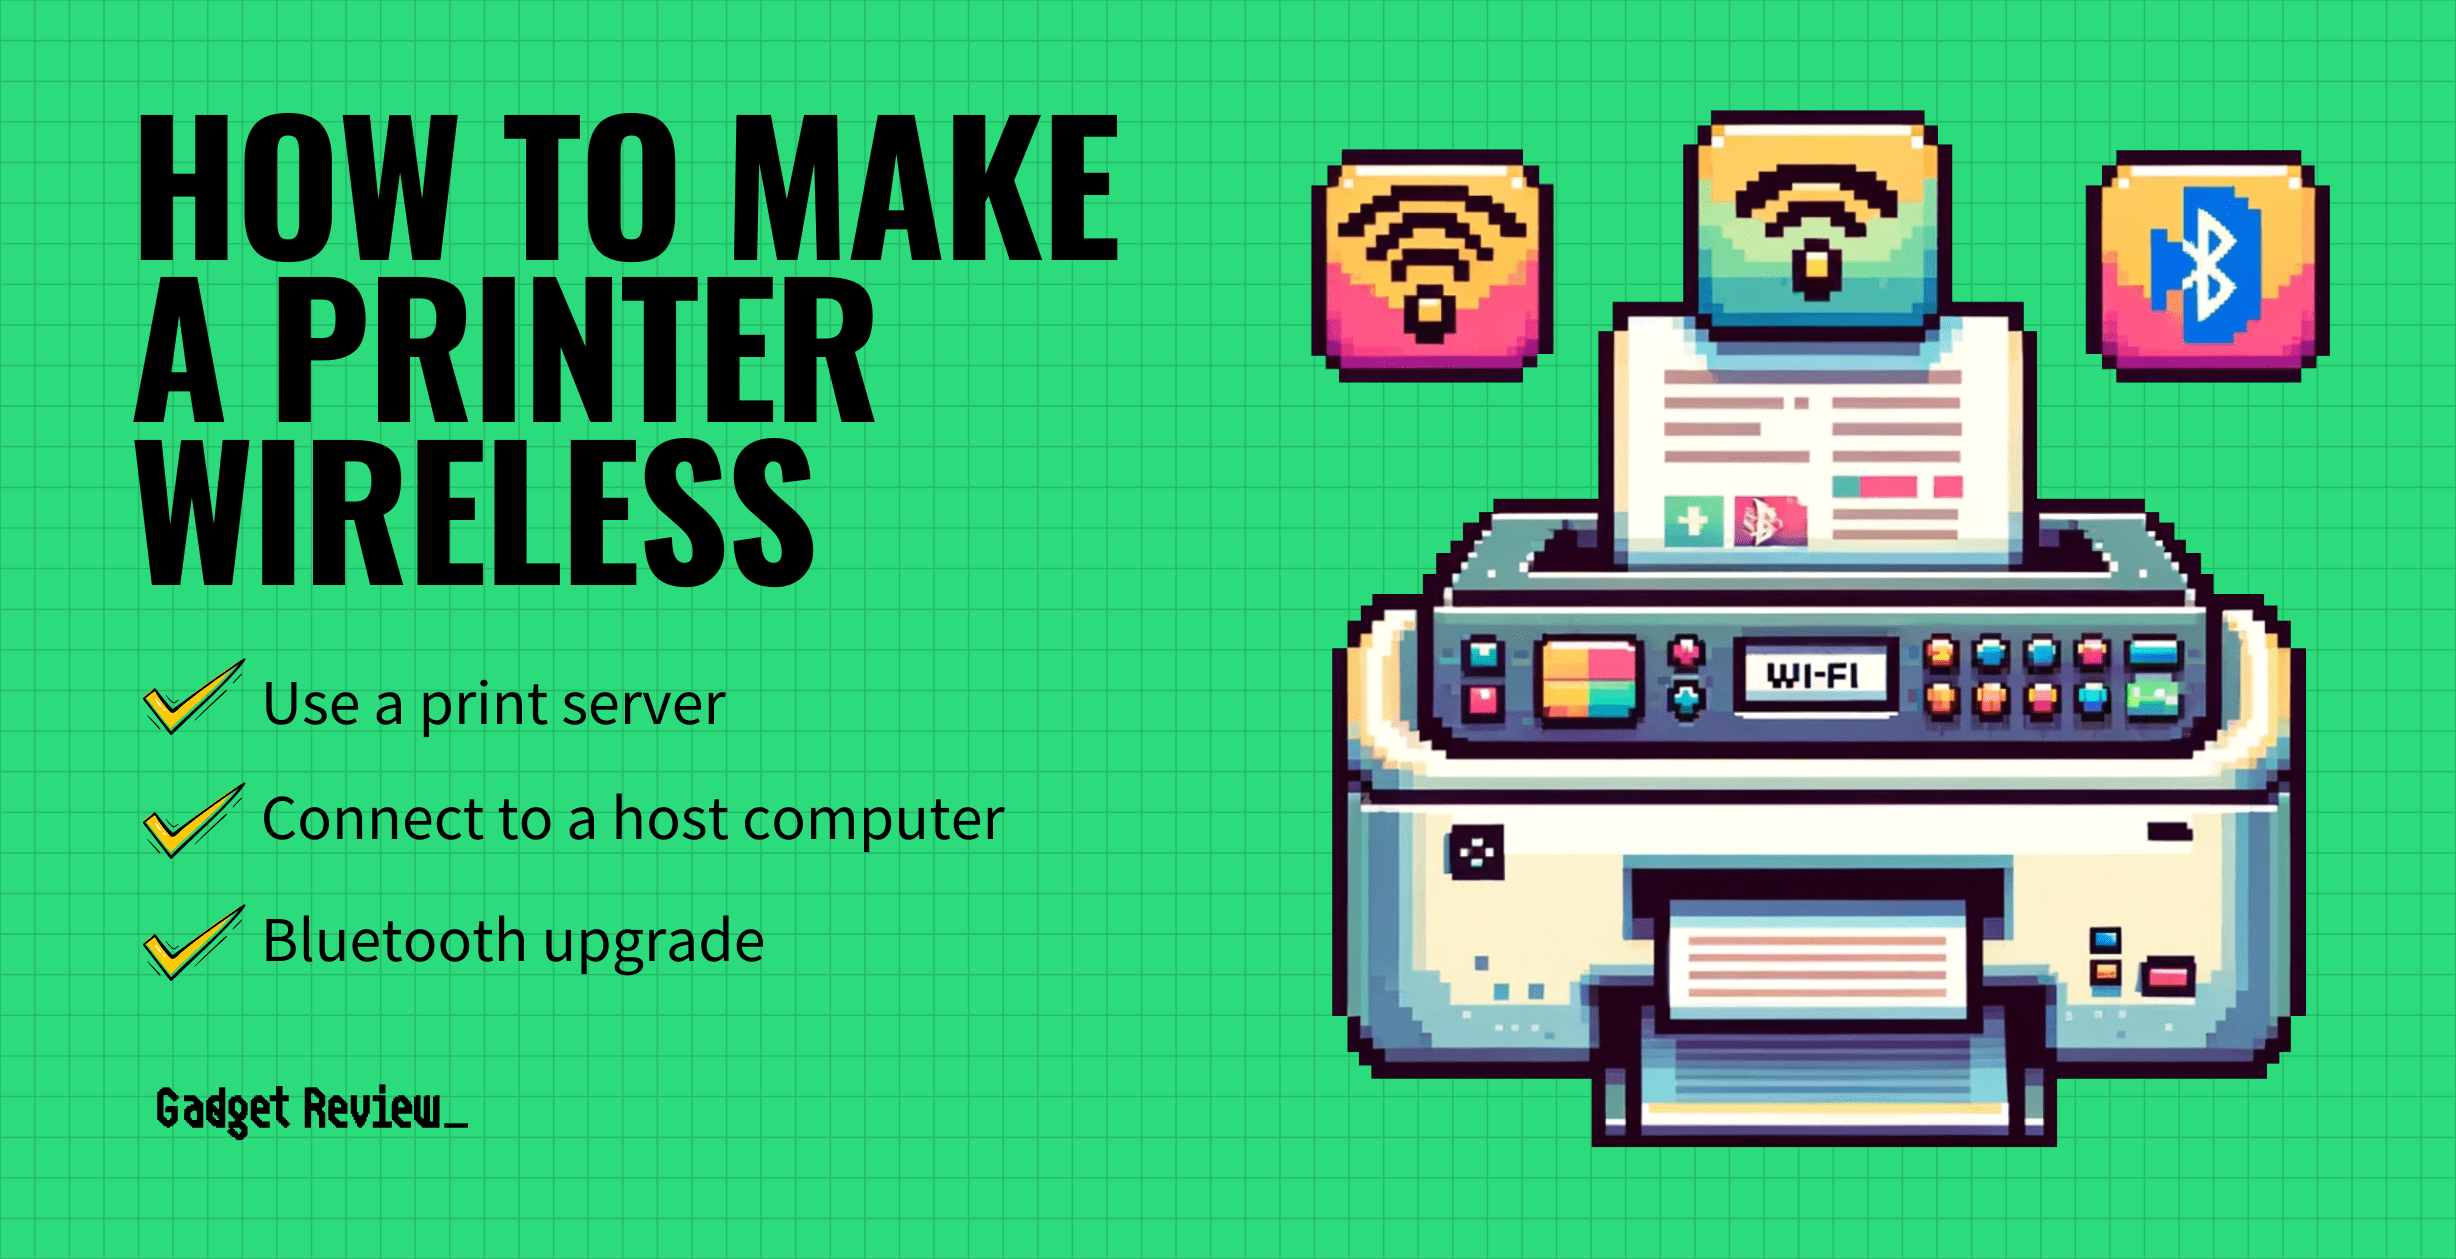 how to make printer wireless guide